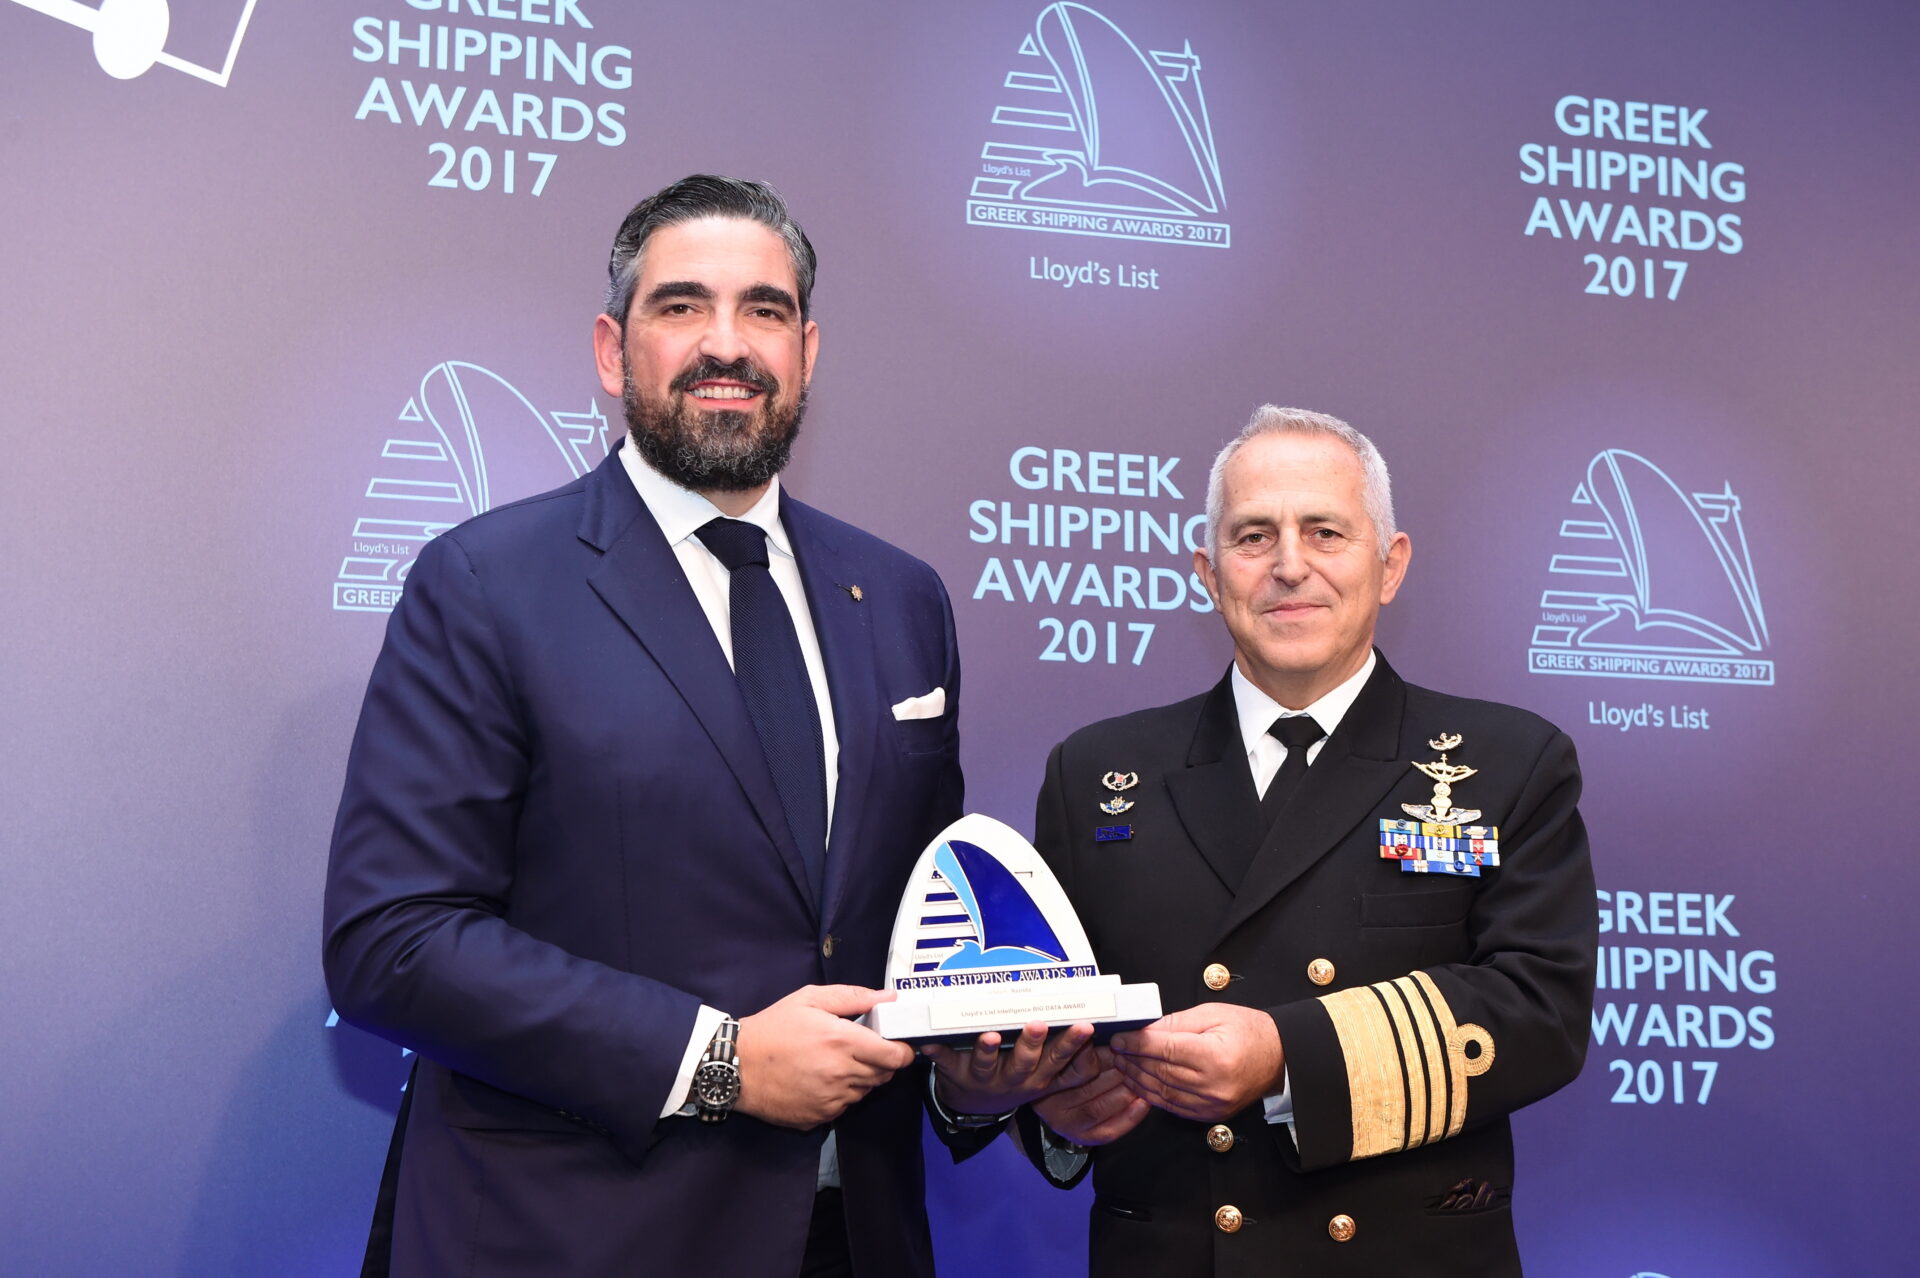 Panos Moraitis of Aspida accepting the Lloyd’s List Intelligence Big Data Award from the Chief of Hellenic Defence General Staff, Admiral Evangelos Apostolakis HN.